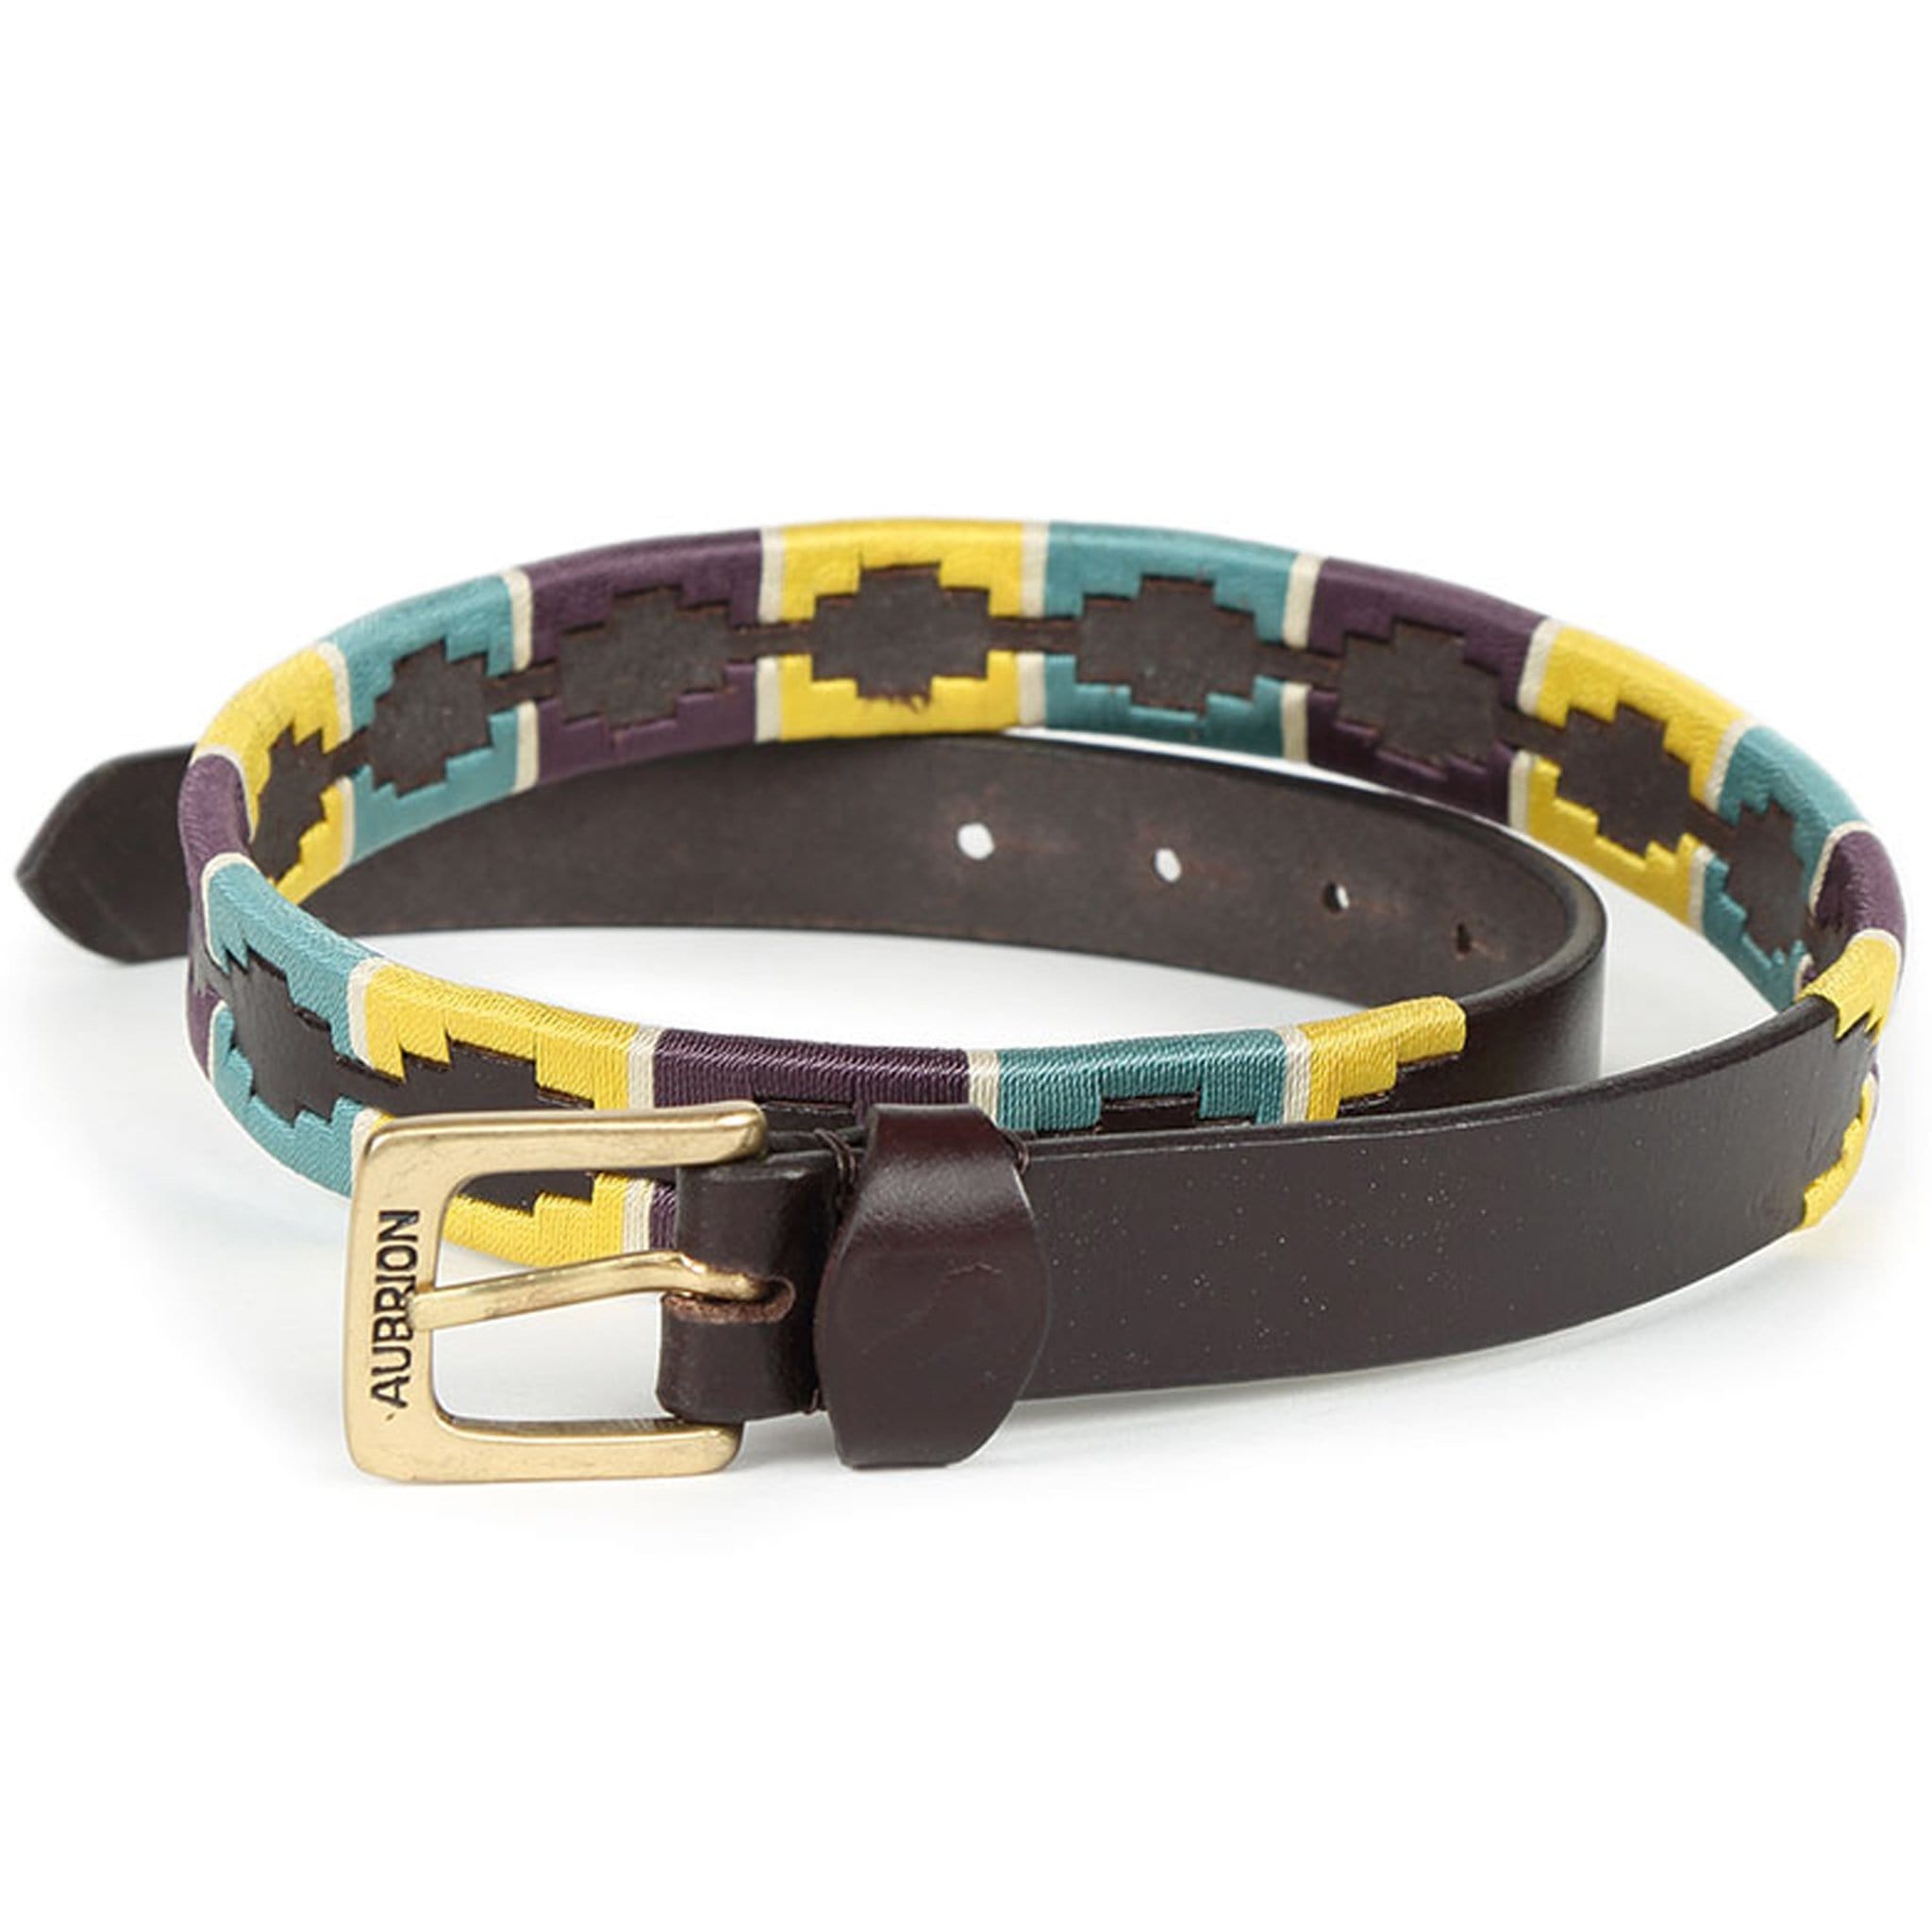 Shires Aubrion Drover Polo Belt Yellow, Green and Purple